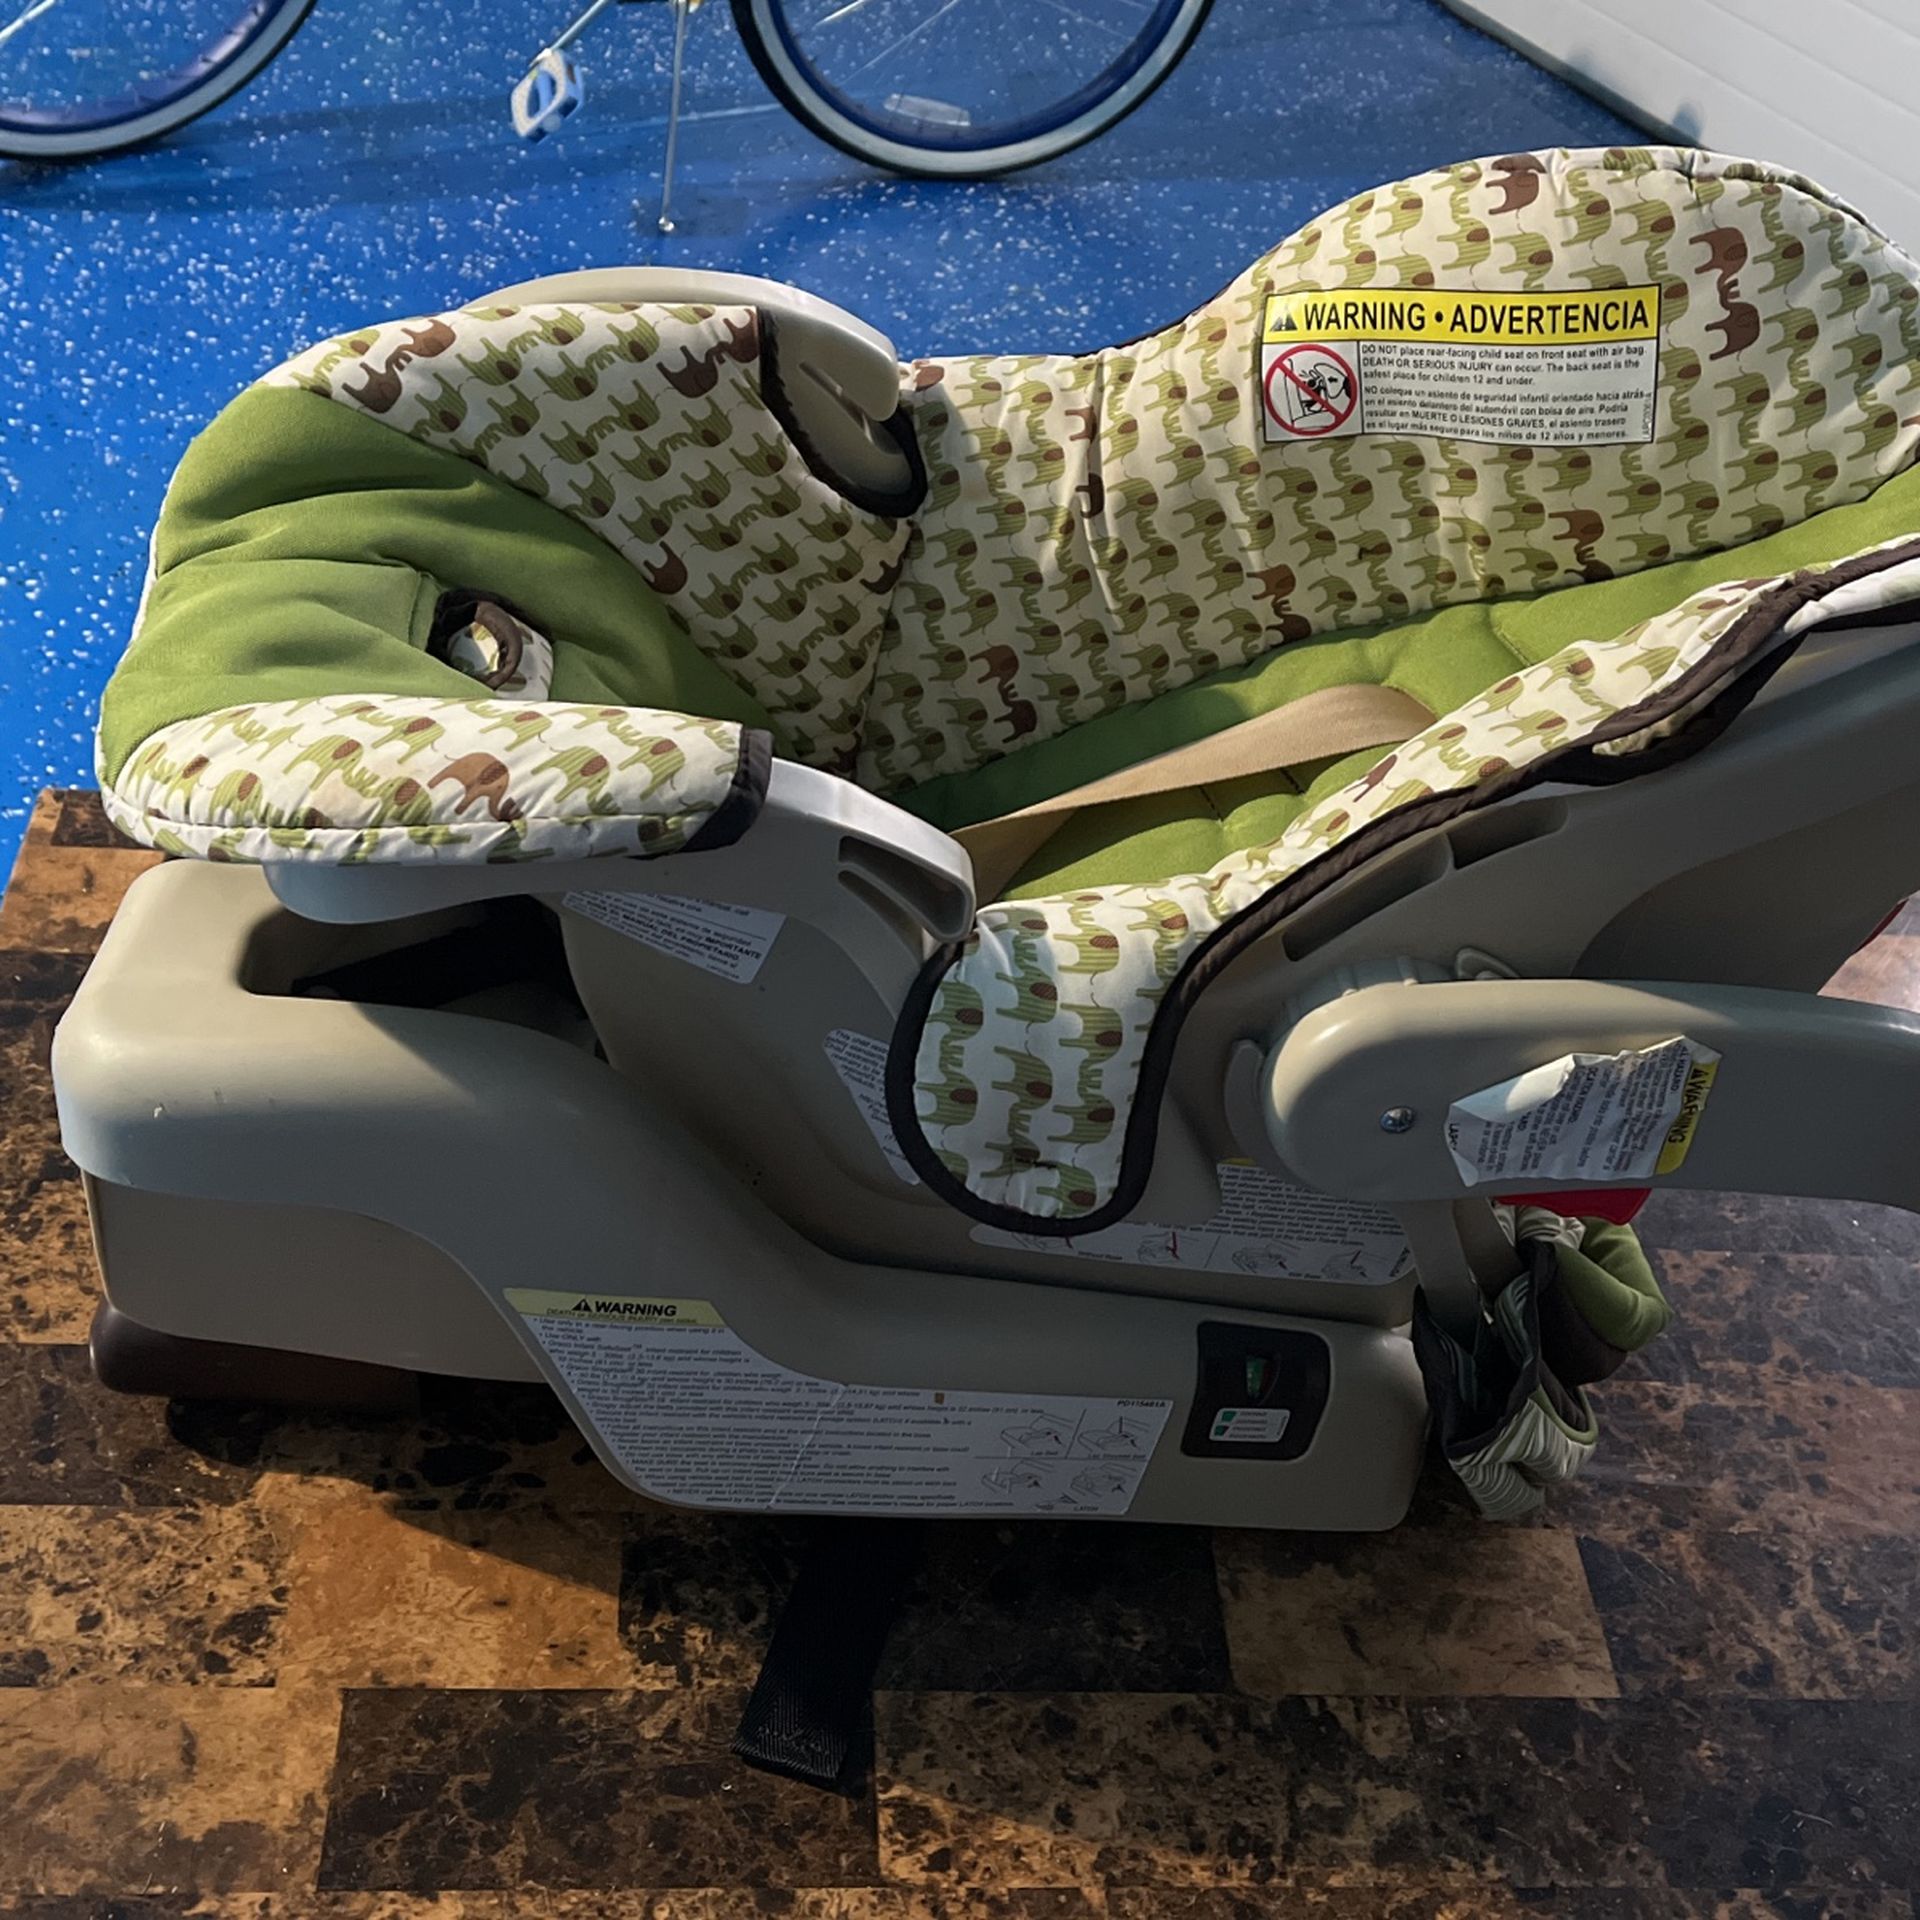 Graco Baby Car Seat Very Good Condition 